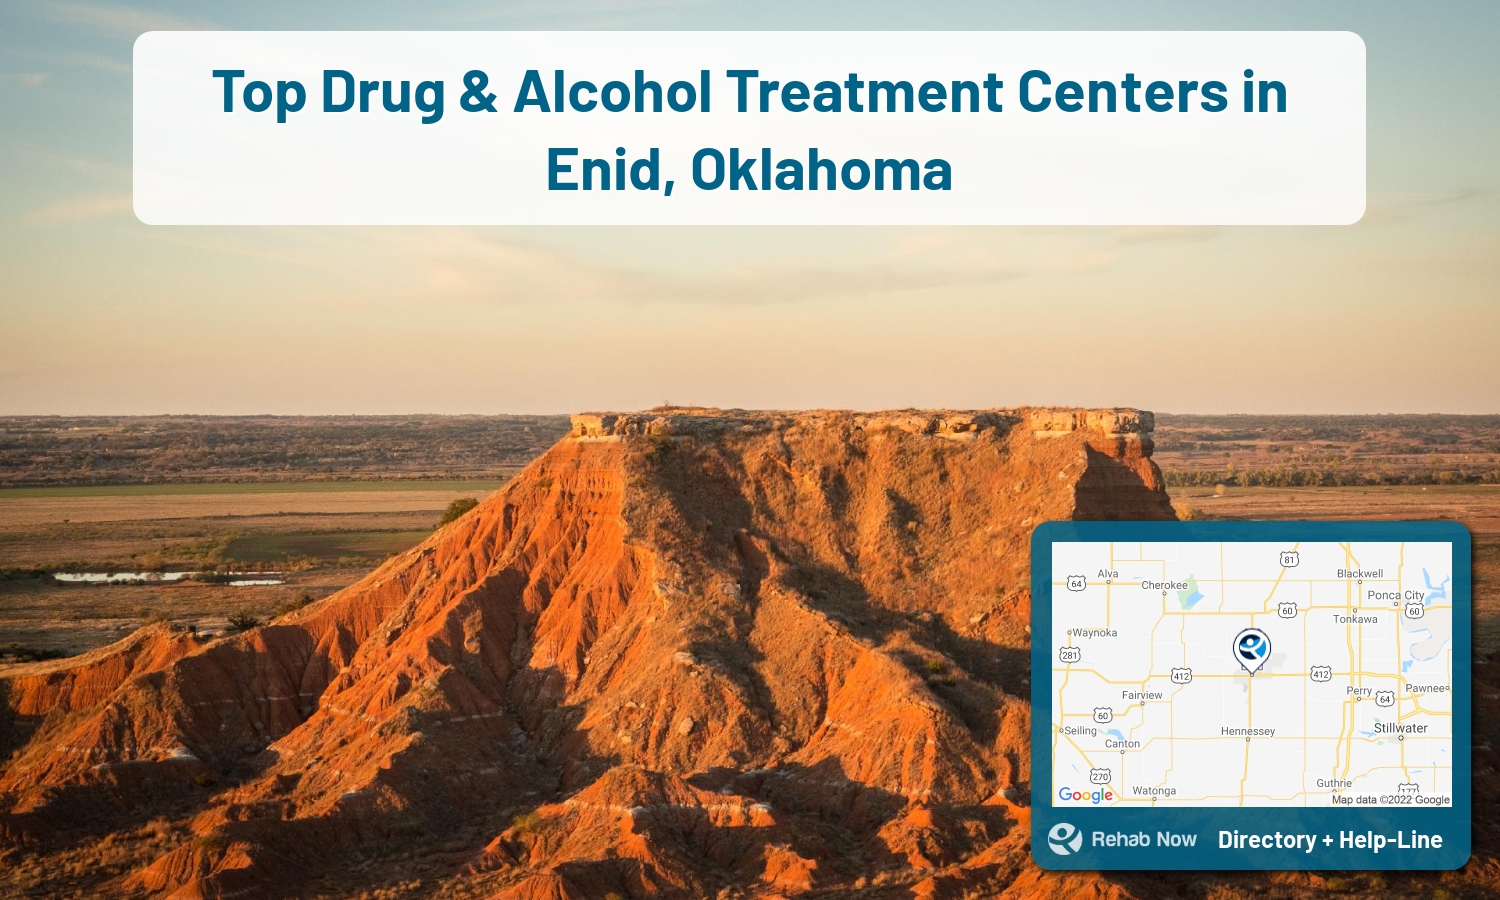 Drug rehab and alcohol treatment services nearby Enid, OK. Need help choosing a treatment program? Call our free hotline!